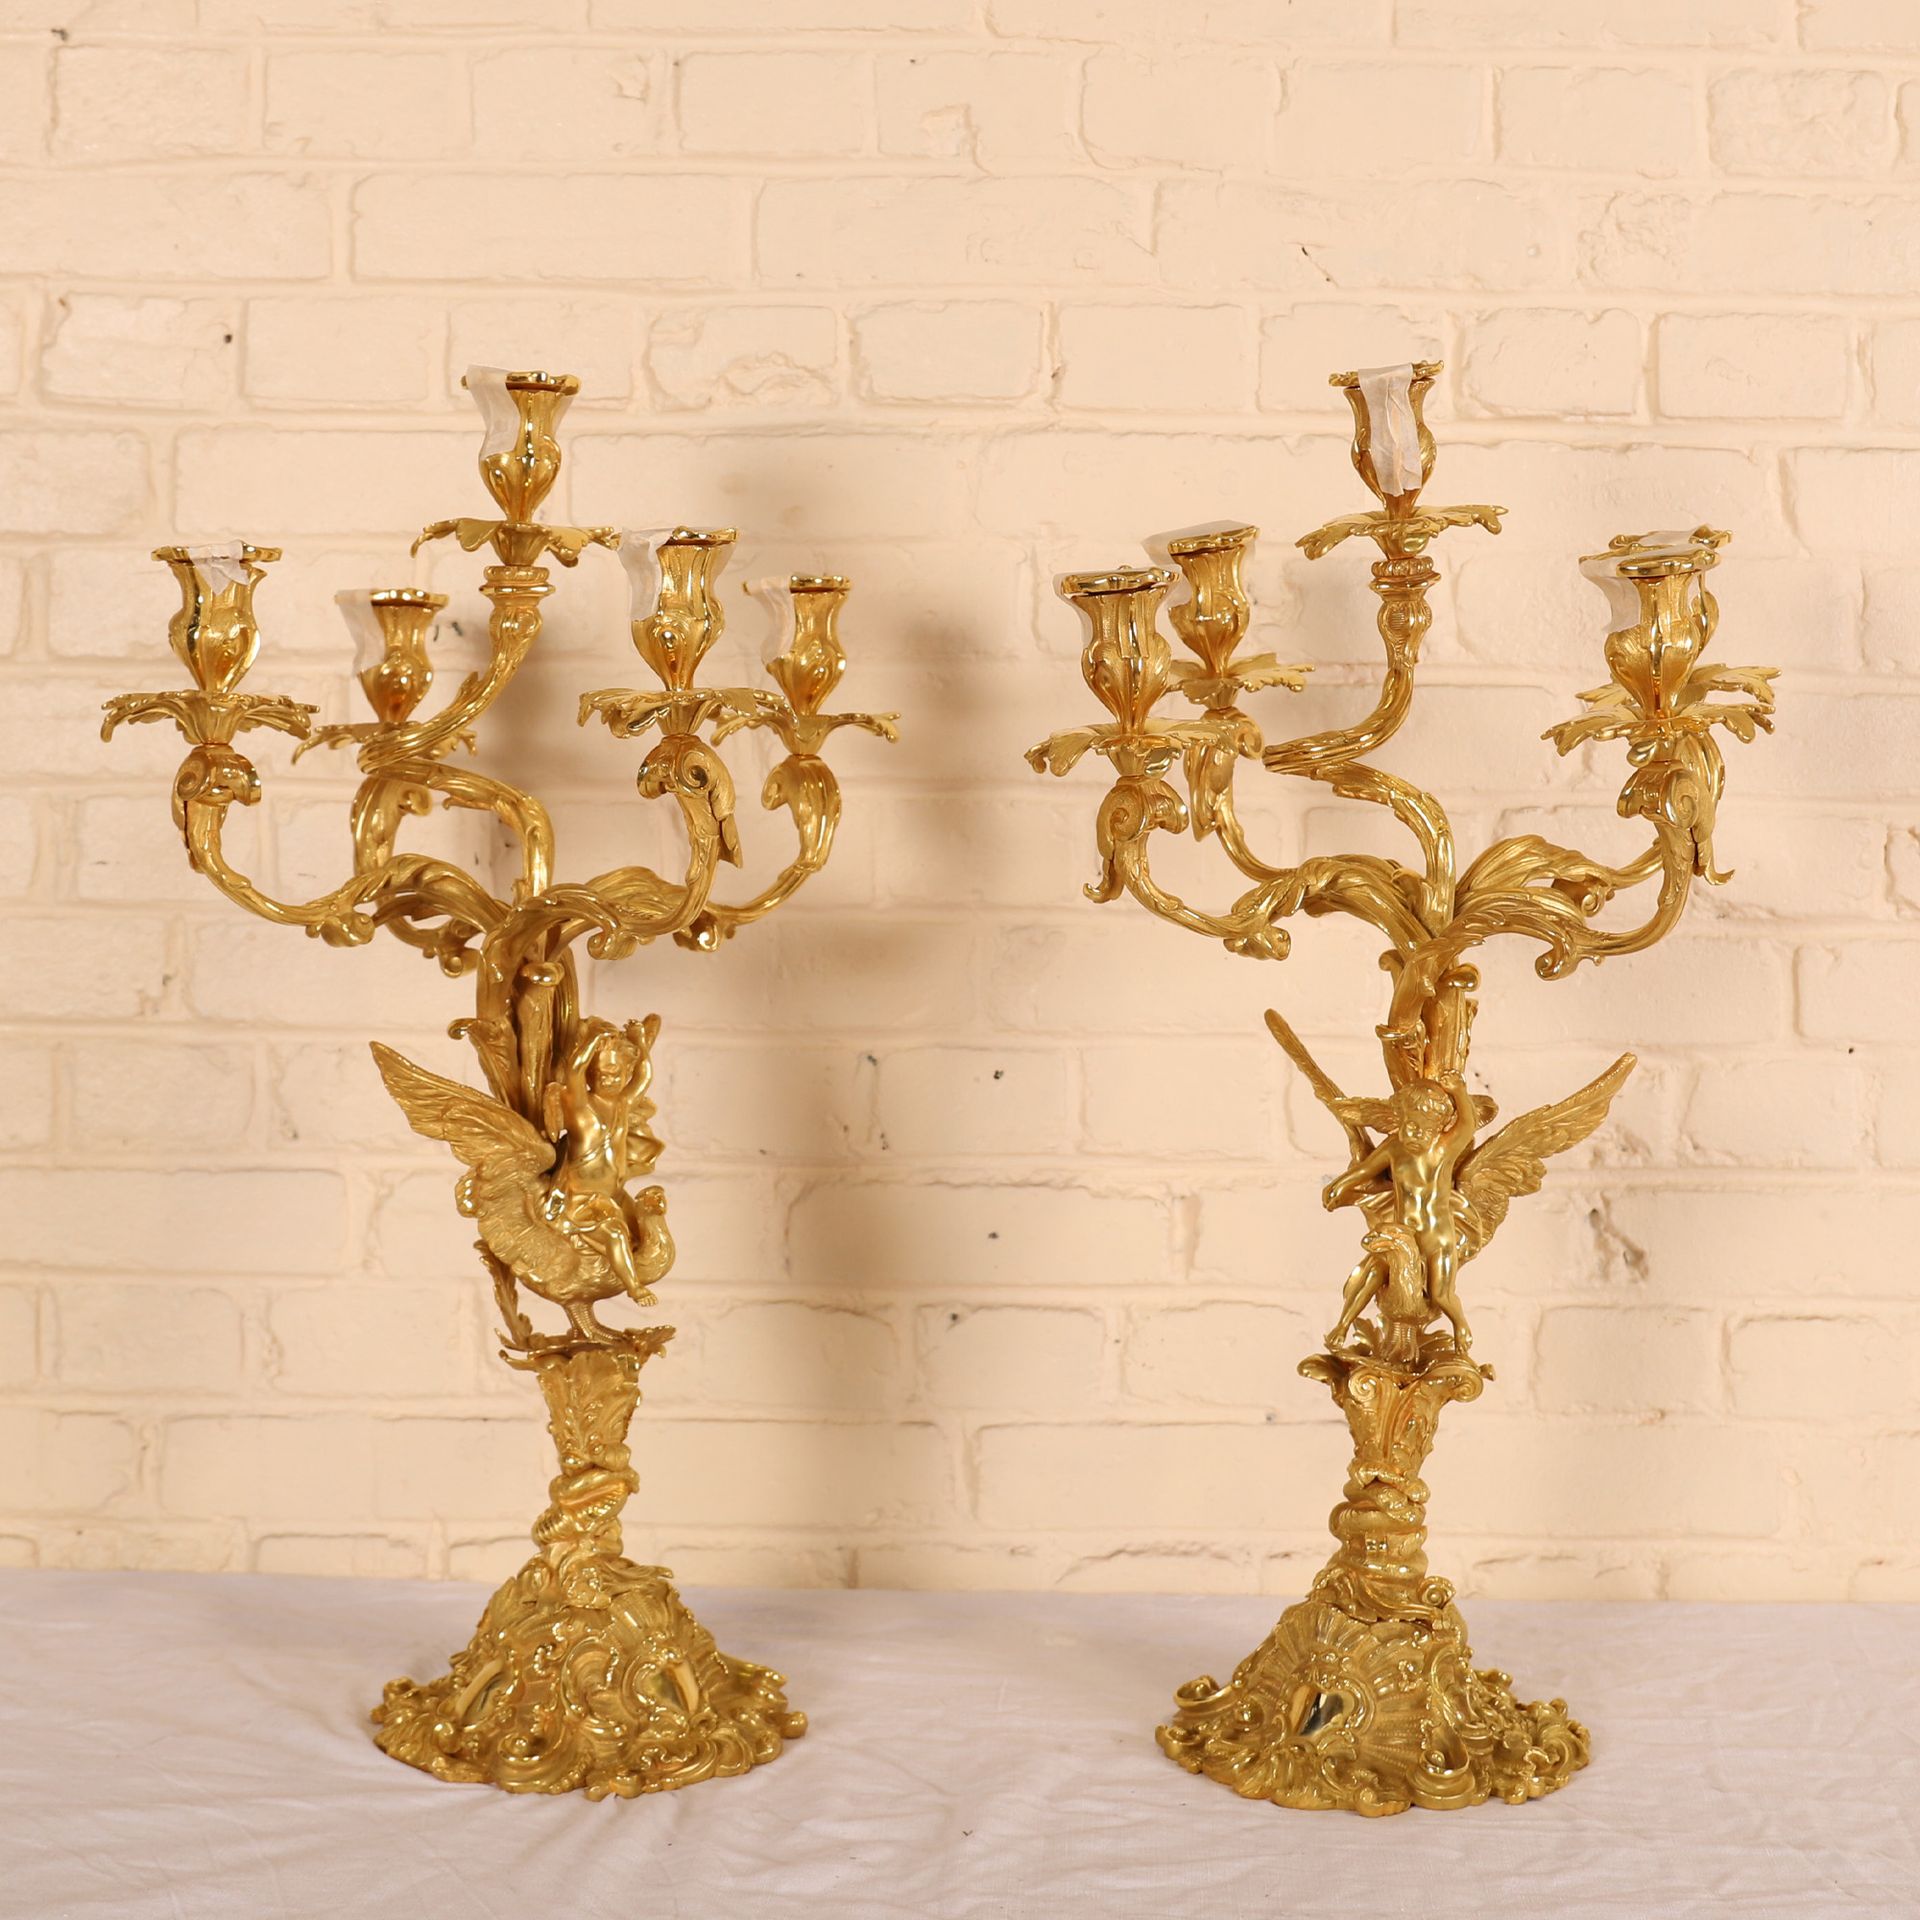 Null PAIR OF CANDELABRAS IN CHASED AND GILDED BRONZE WITH FIVE ARMS OF LIGHT

De&hellip;